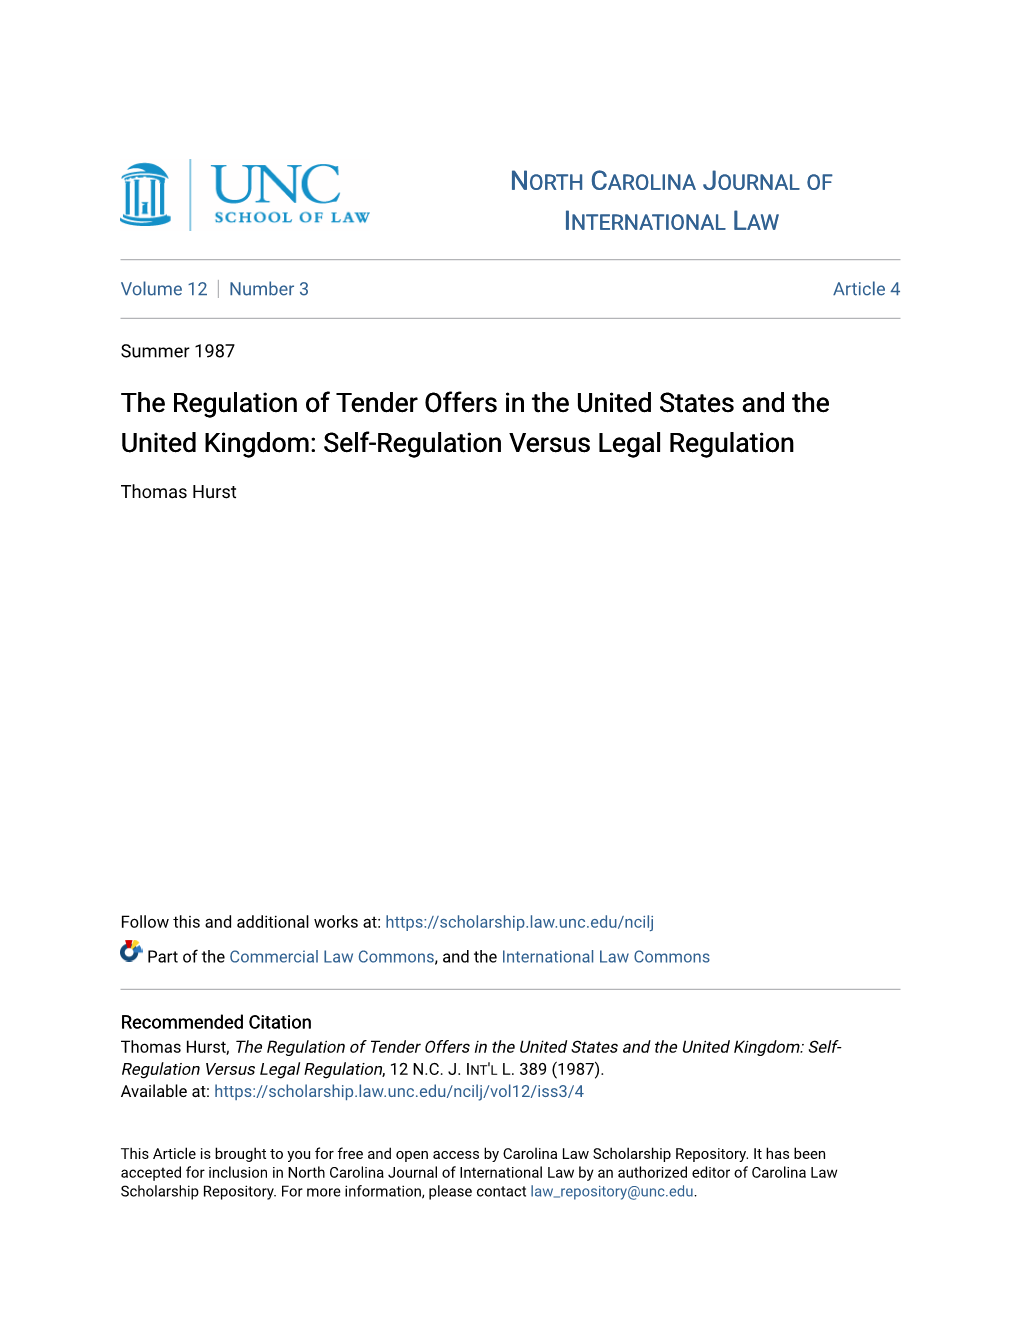 The Regulation of Tender Offers in the United States and the United Kingdom: Self-Regulation Versus Legal Regulation